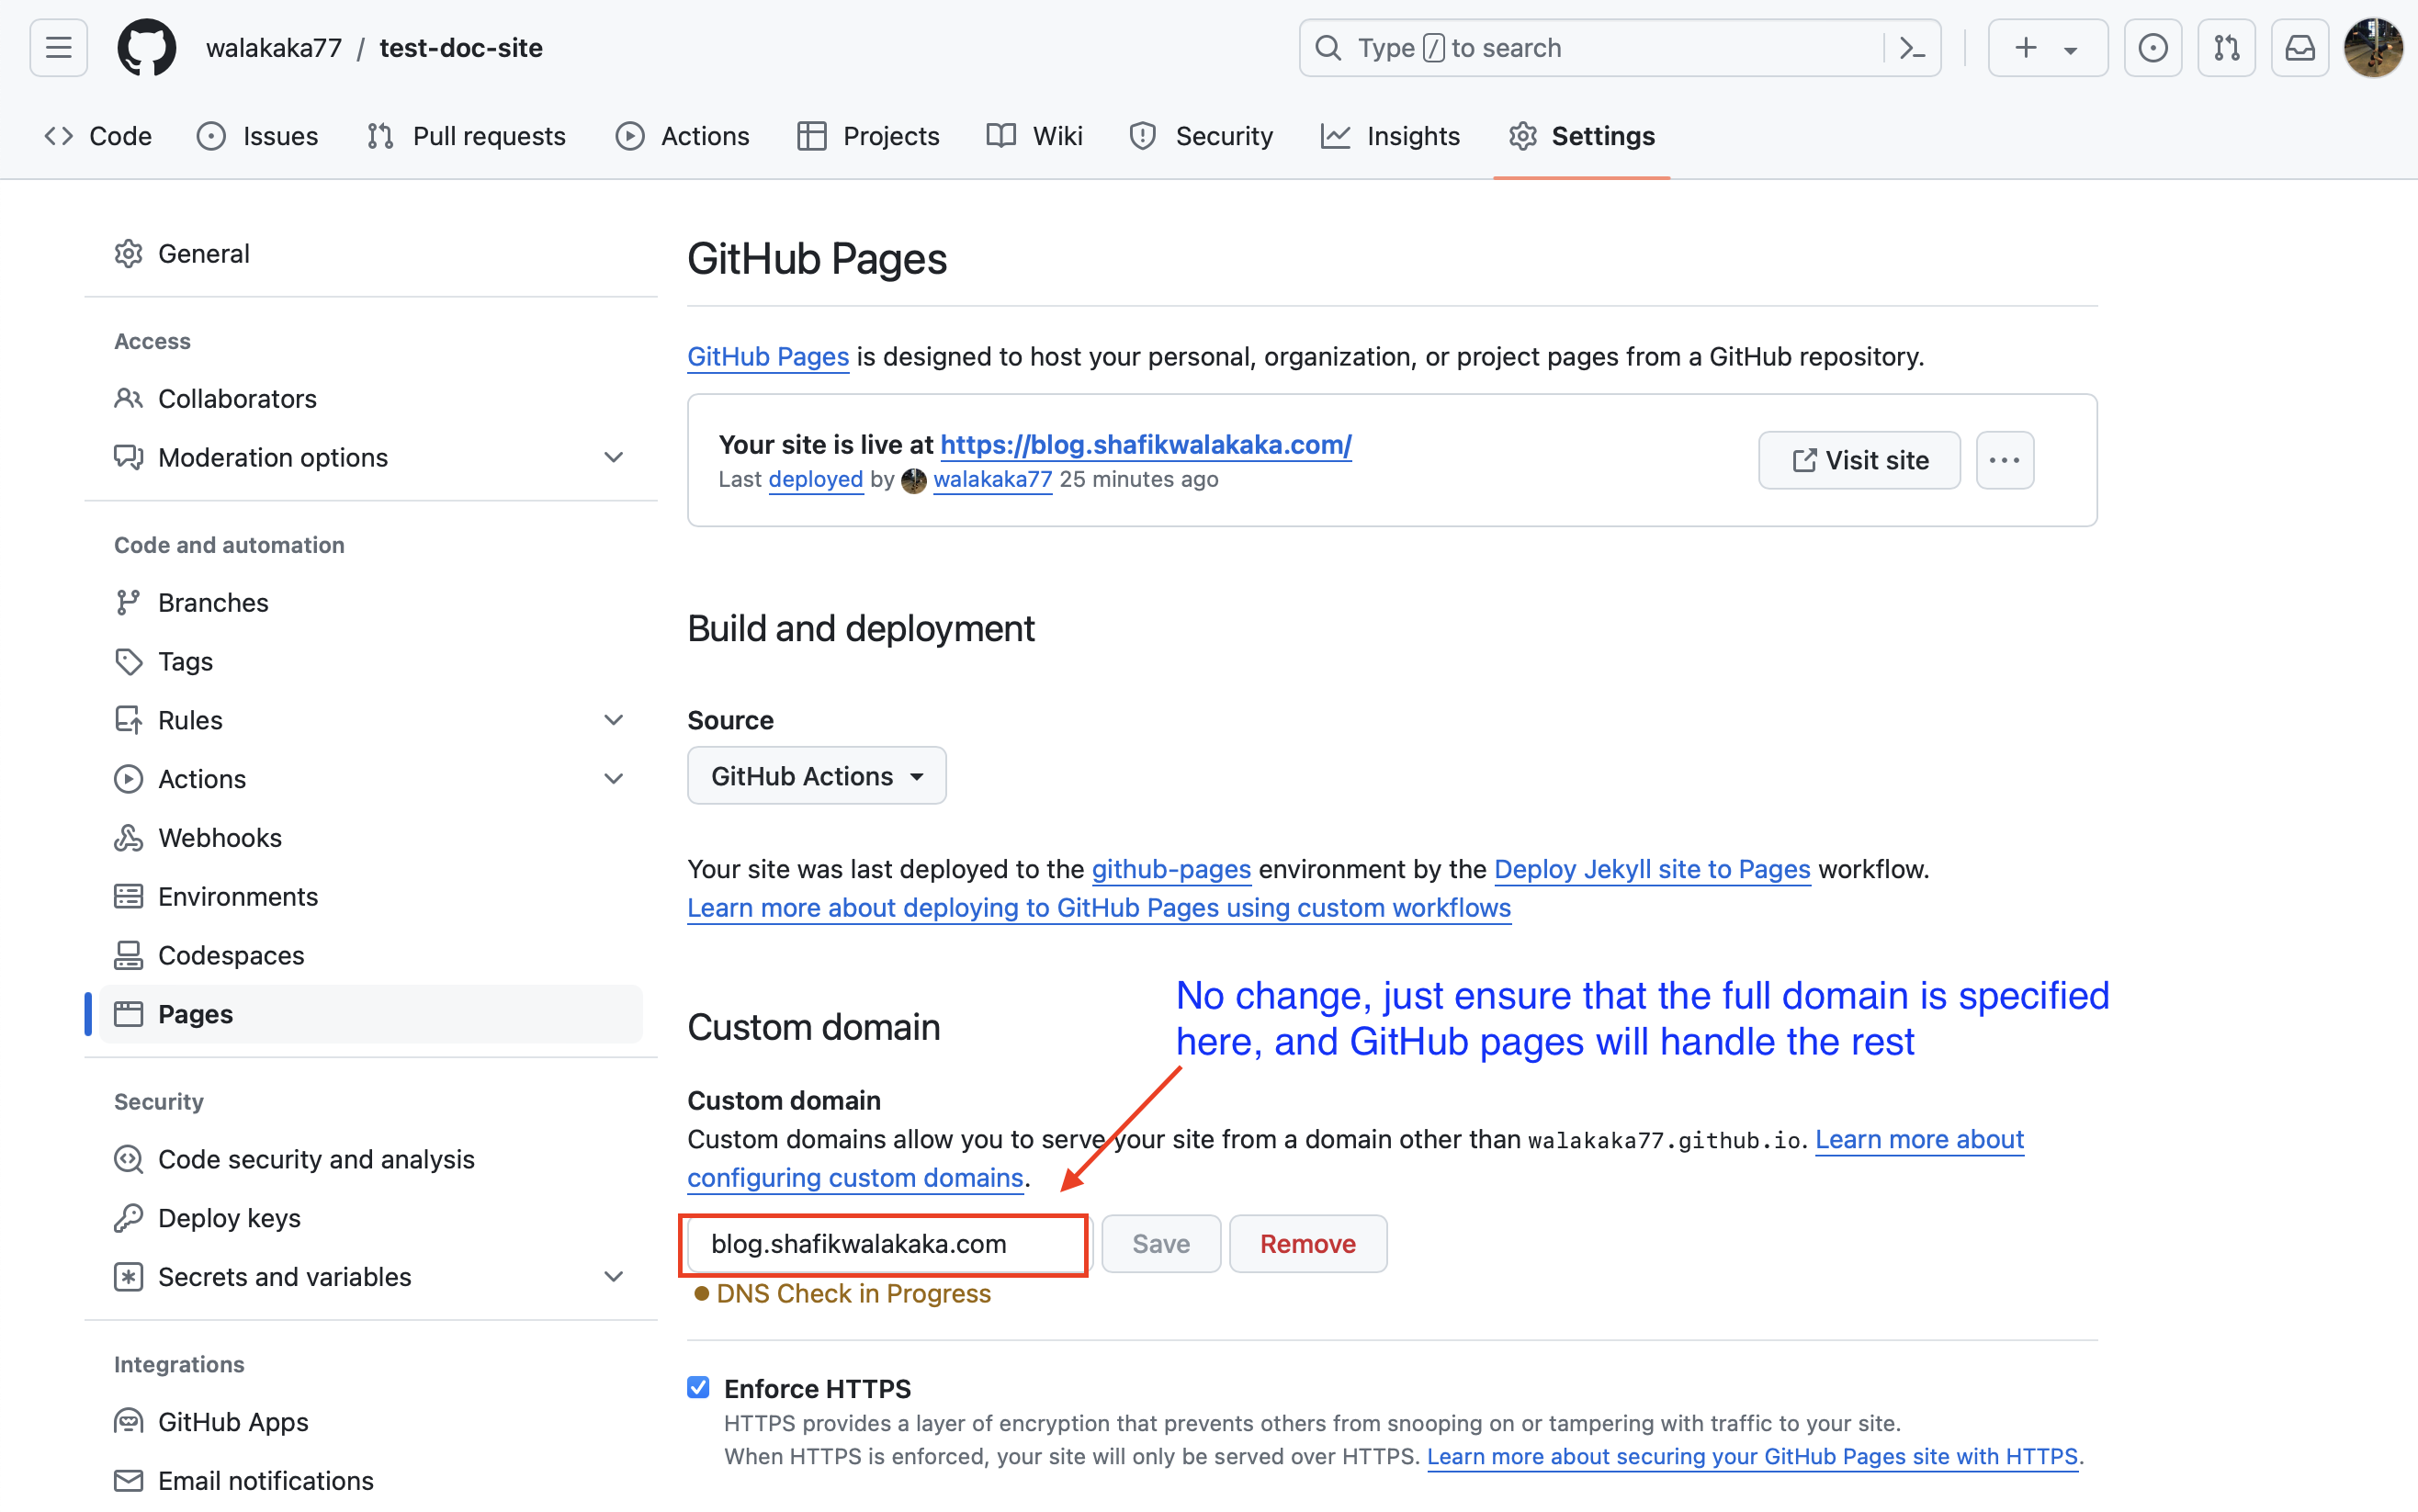 image showing the github pages configuration for setting the custom domain for subdomain